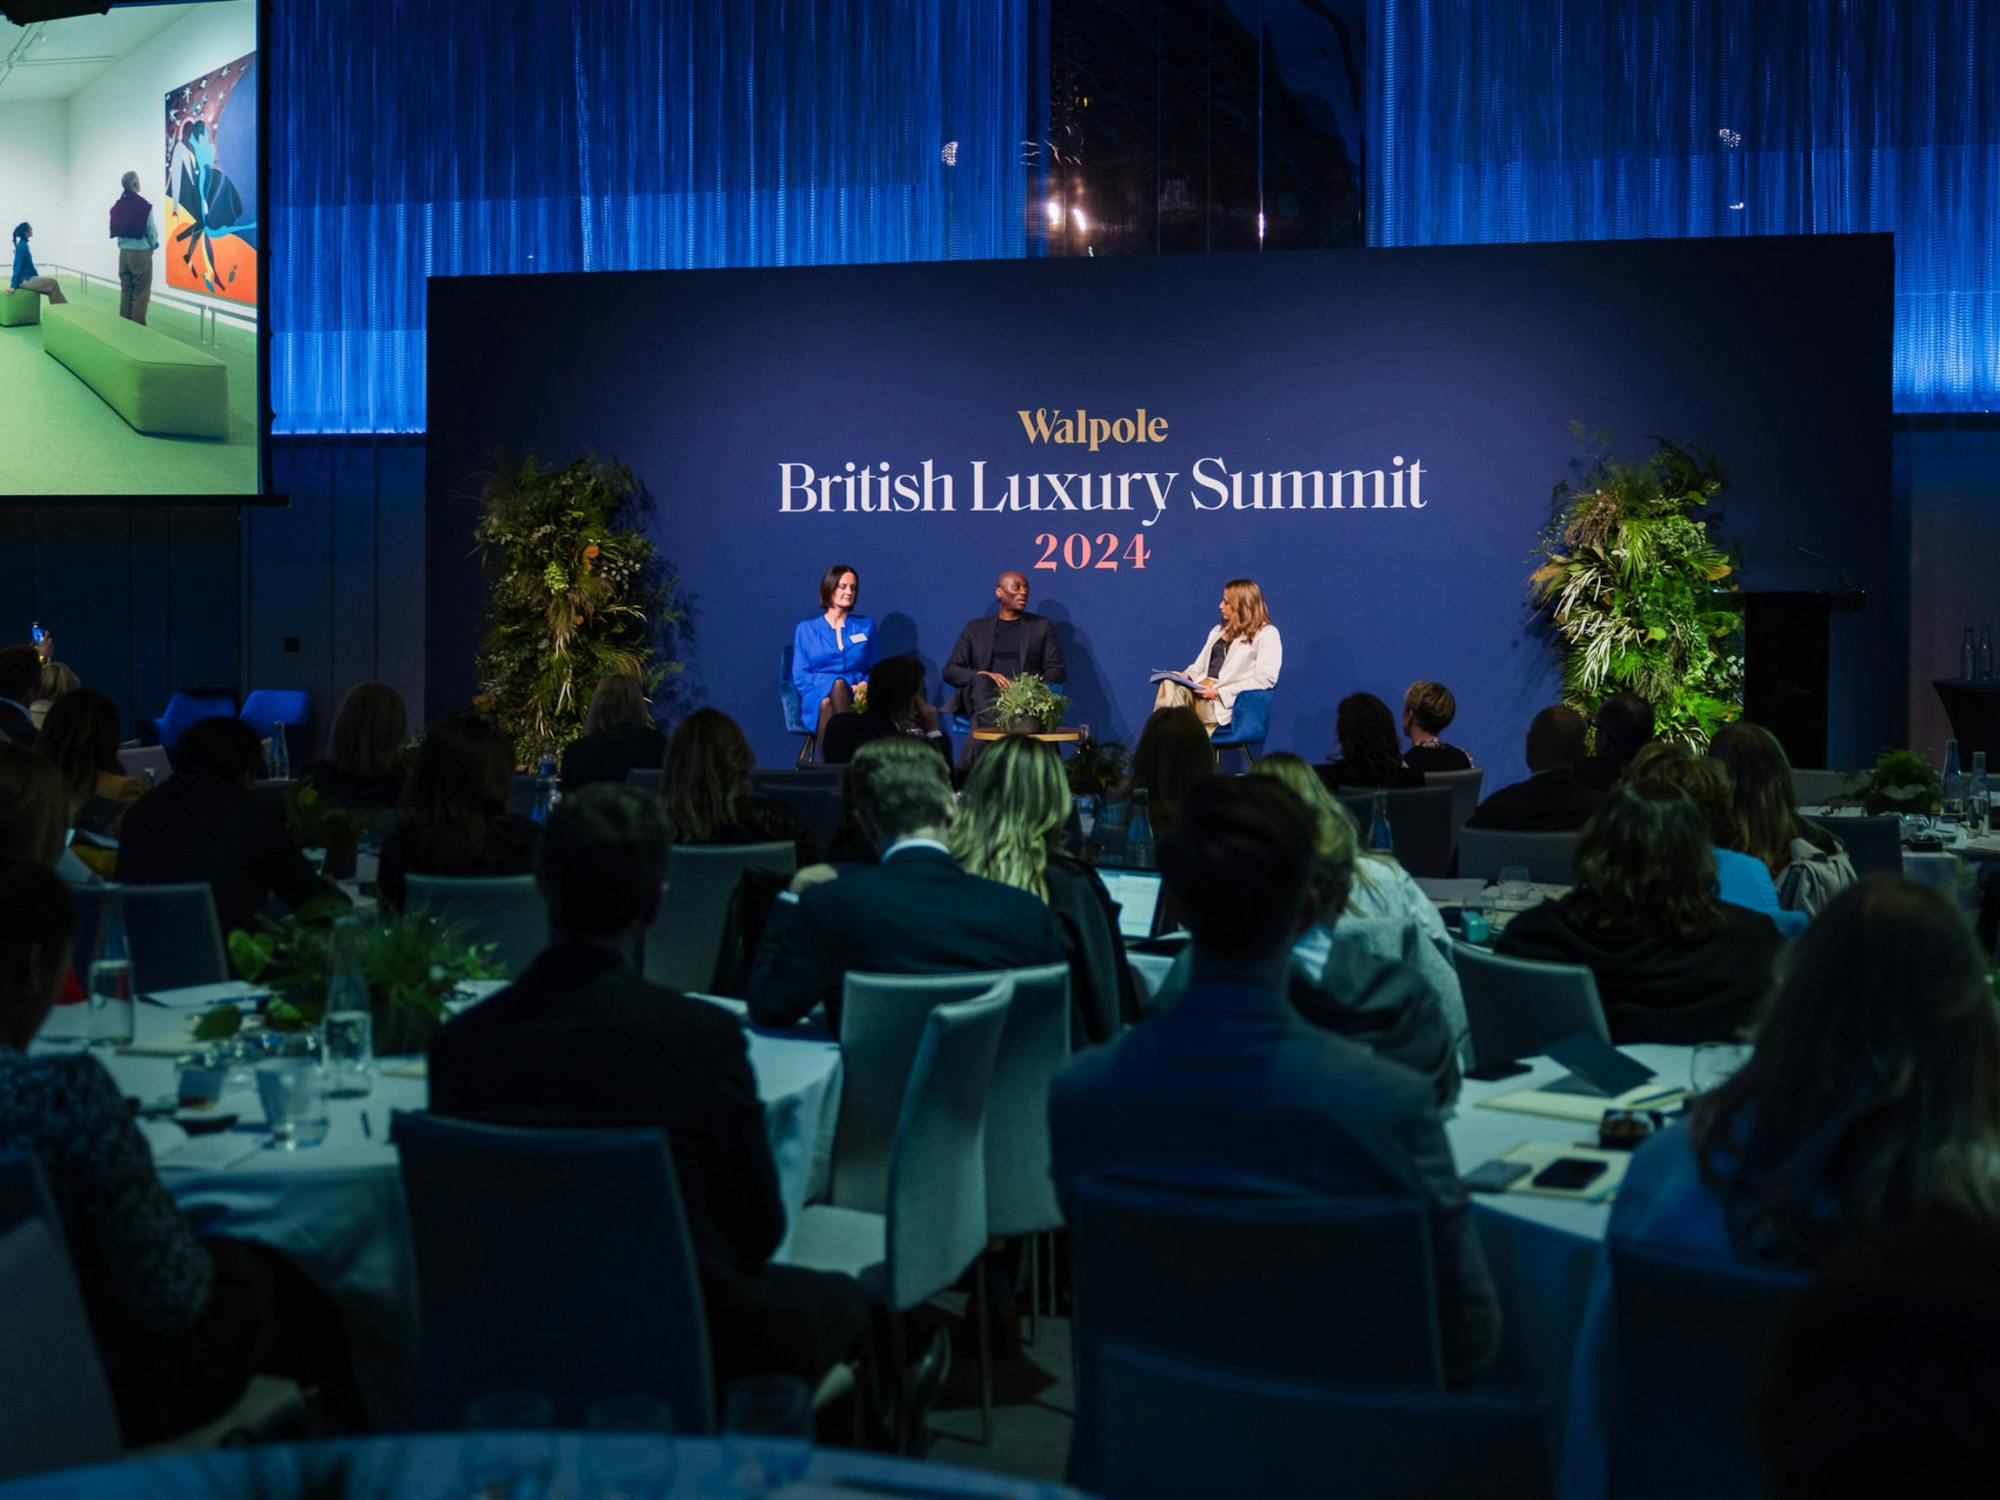 Events All the photos from the Walpole British Luxury Summit 2024 